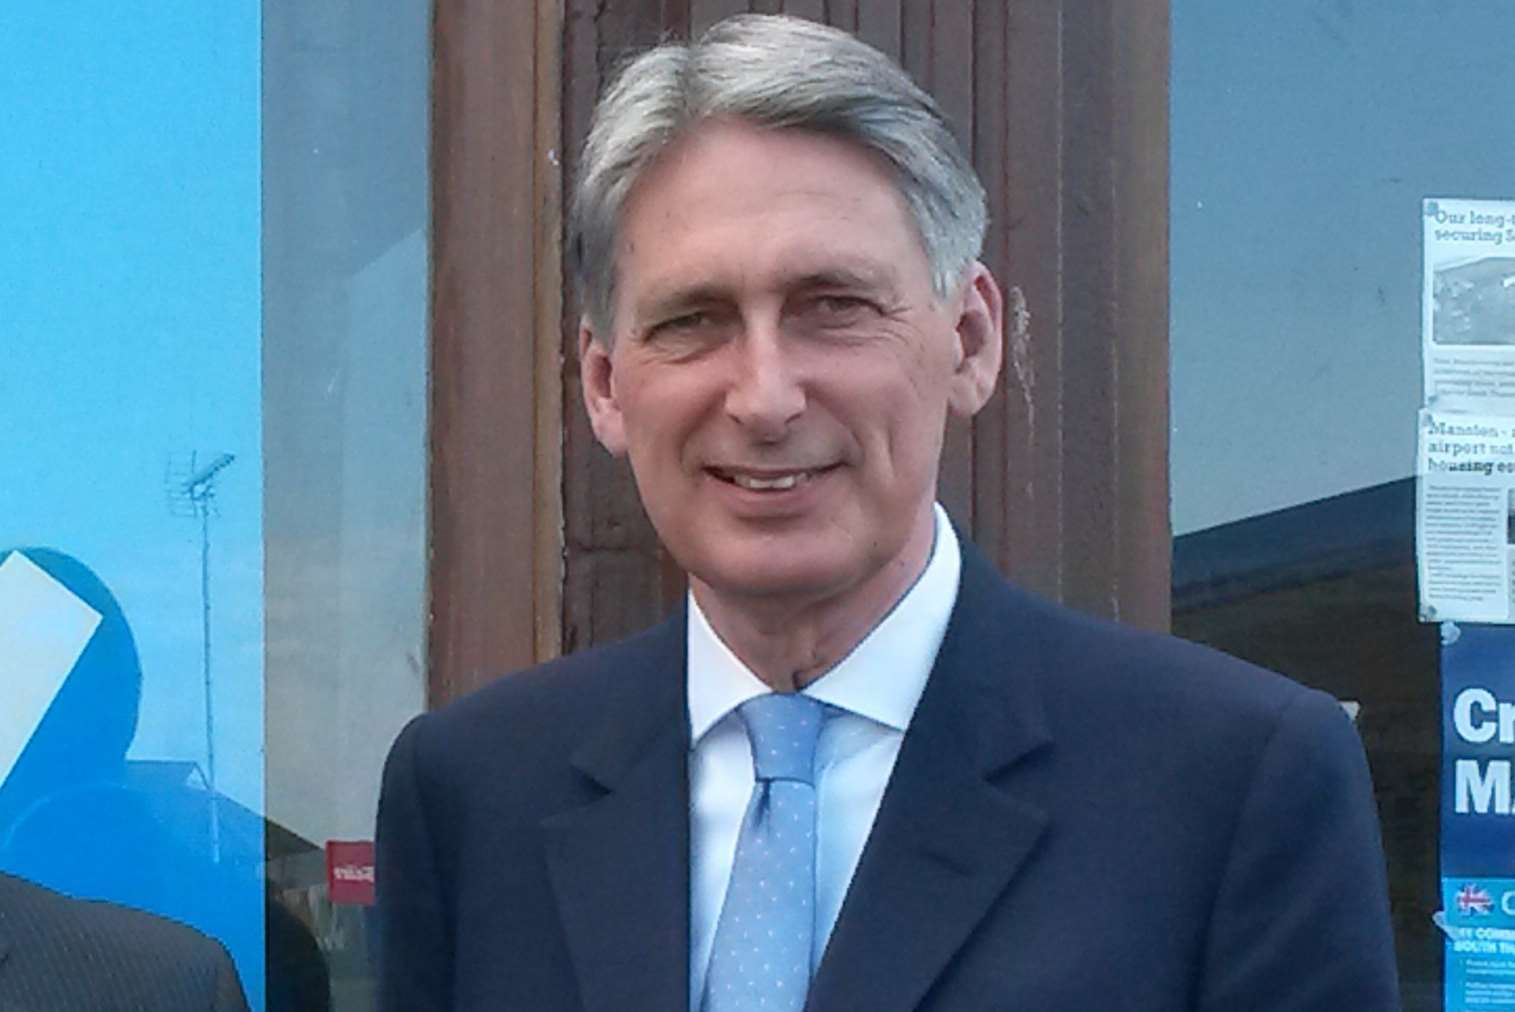 Chancellor Philip Hammond delivers his first Autumn Statement today